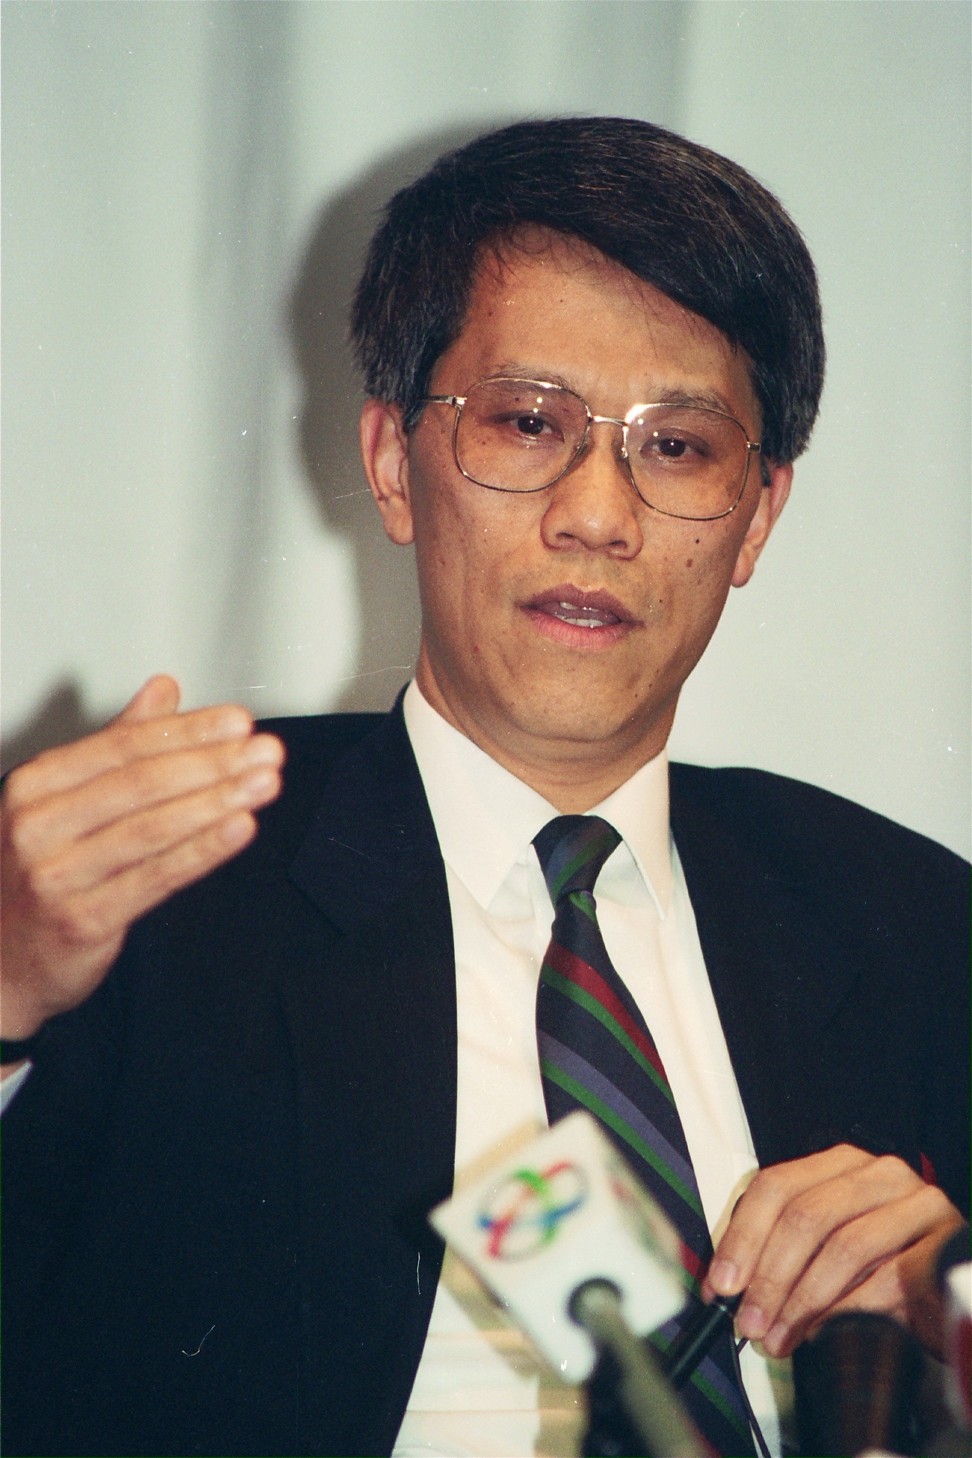 Joseph Yam Chi-kwong, who was chief executive of the Hong Kong Monetary Authority (HKMA) from 1993 to 2009, in a photograph taken on June 1, 1994. During Yam’s tenure, the HKMA successfully defended the Hong Kong dollar against an onslaught of short selling during the 1997 Asian Financial Crisis. Photo: SCMP